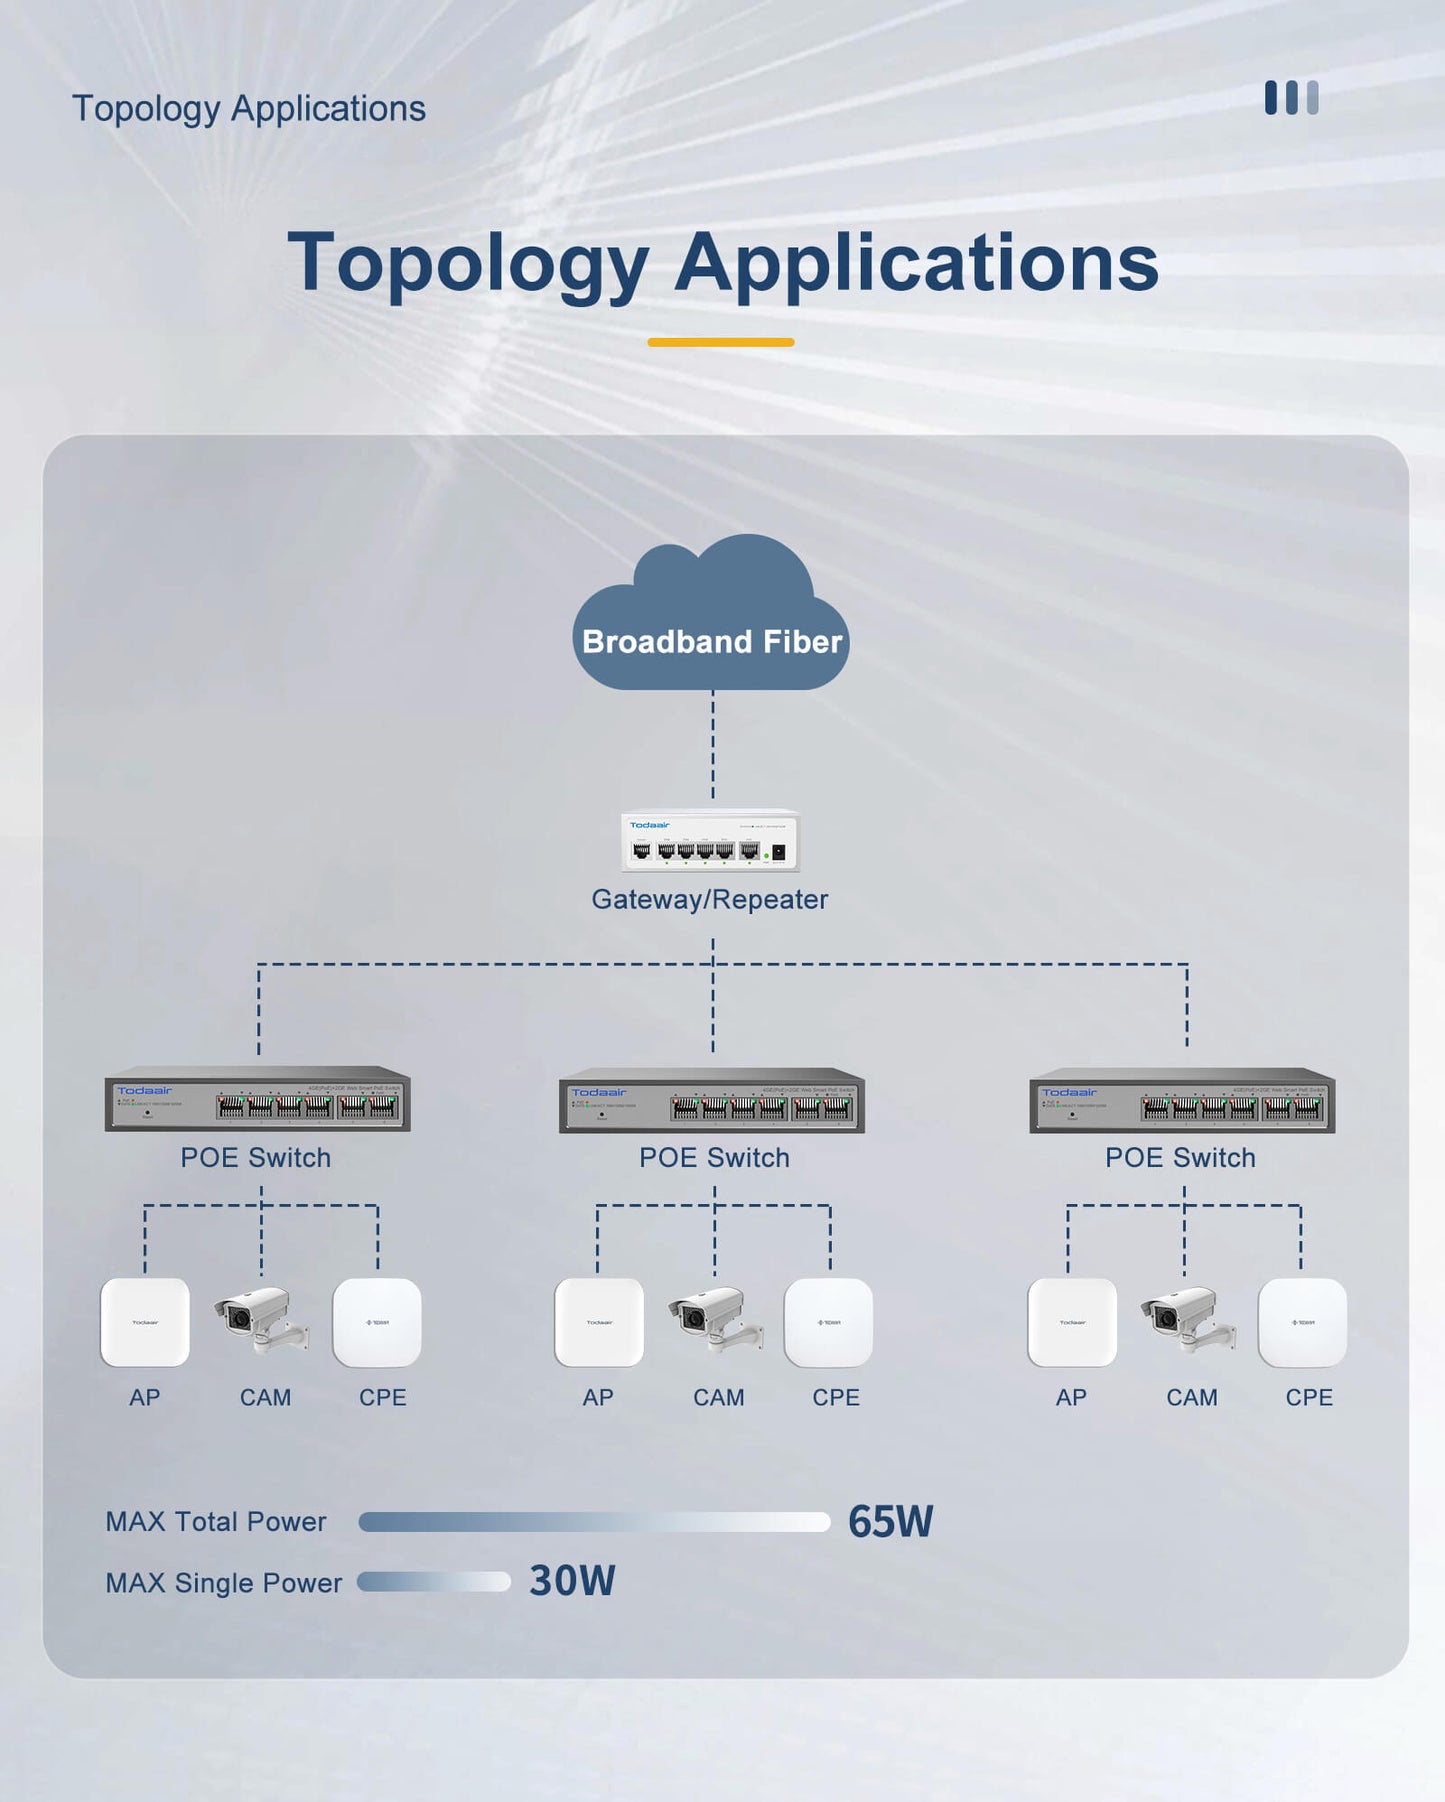 POE network Switch topology application